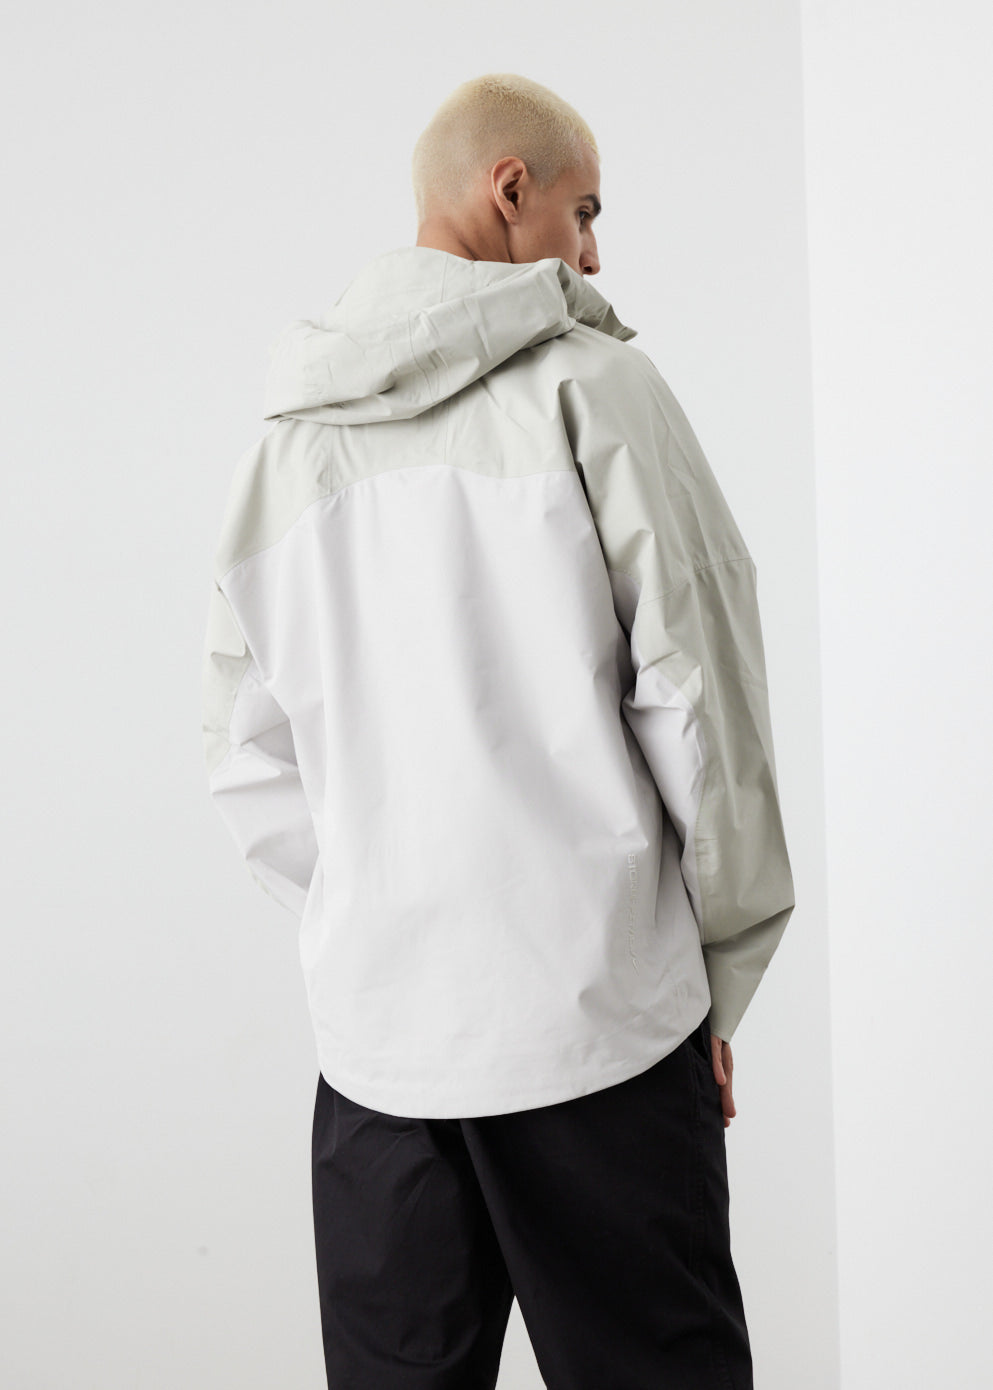 ACG Chain of Craters Jacket